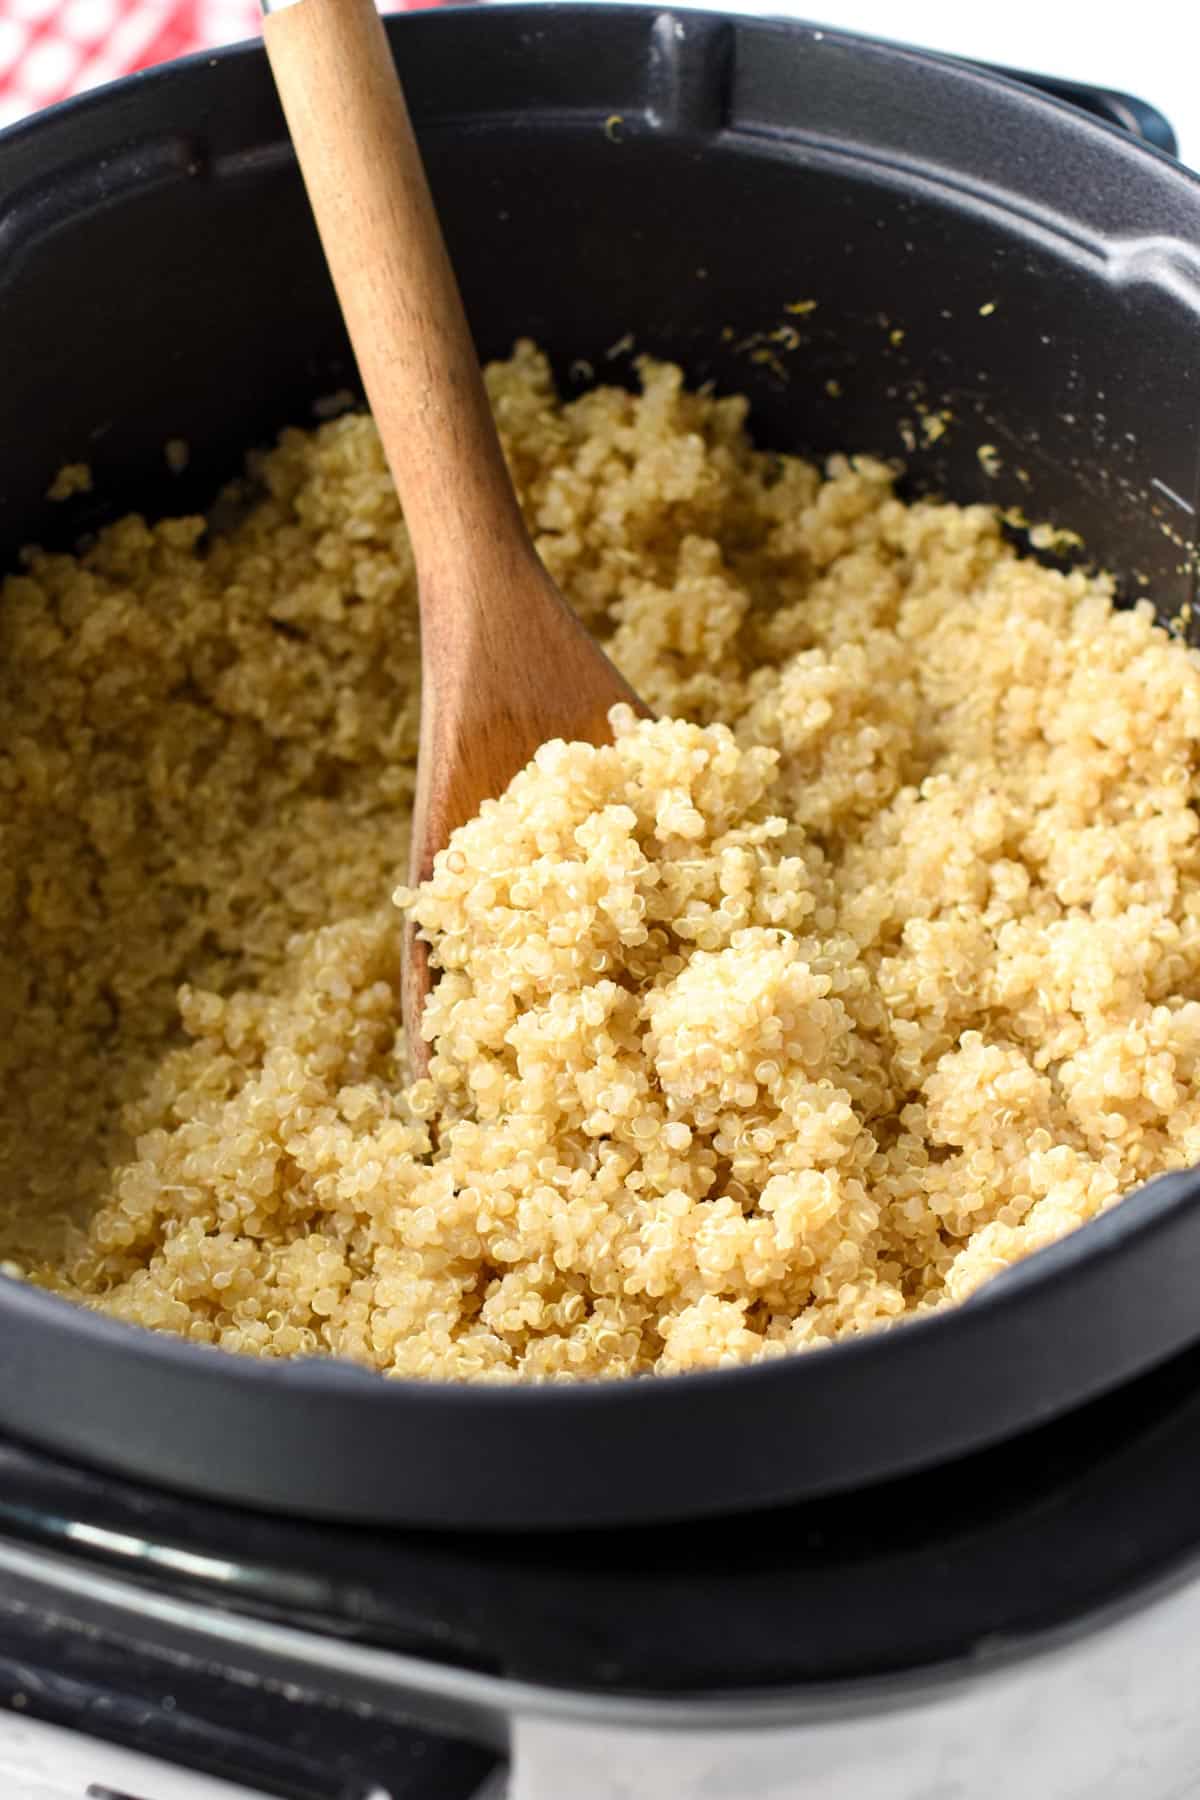 https://www.theconsciousplantkitchen.com/wp-content/uploads/2022/07/how-to-cook-quinoa-in-a-rice-cooker-7.jpg